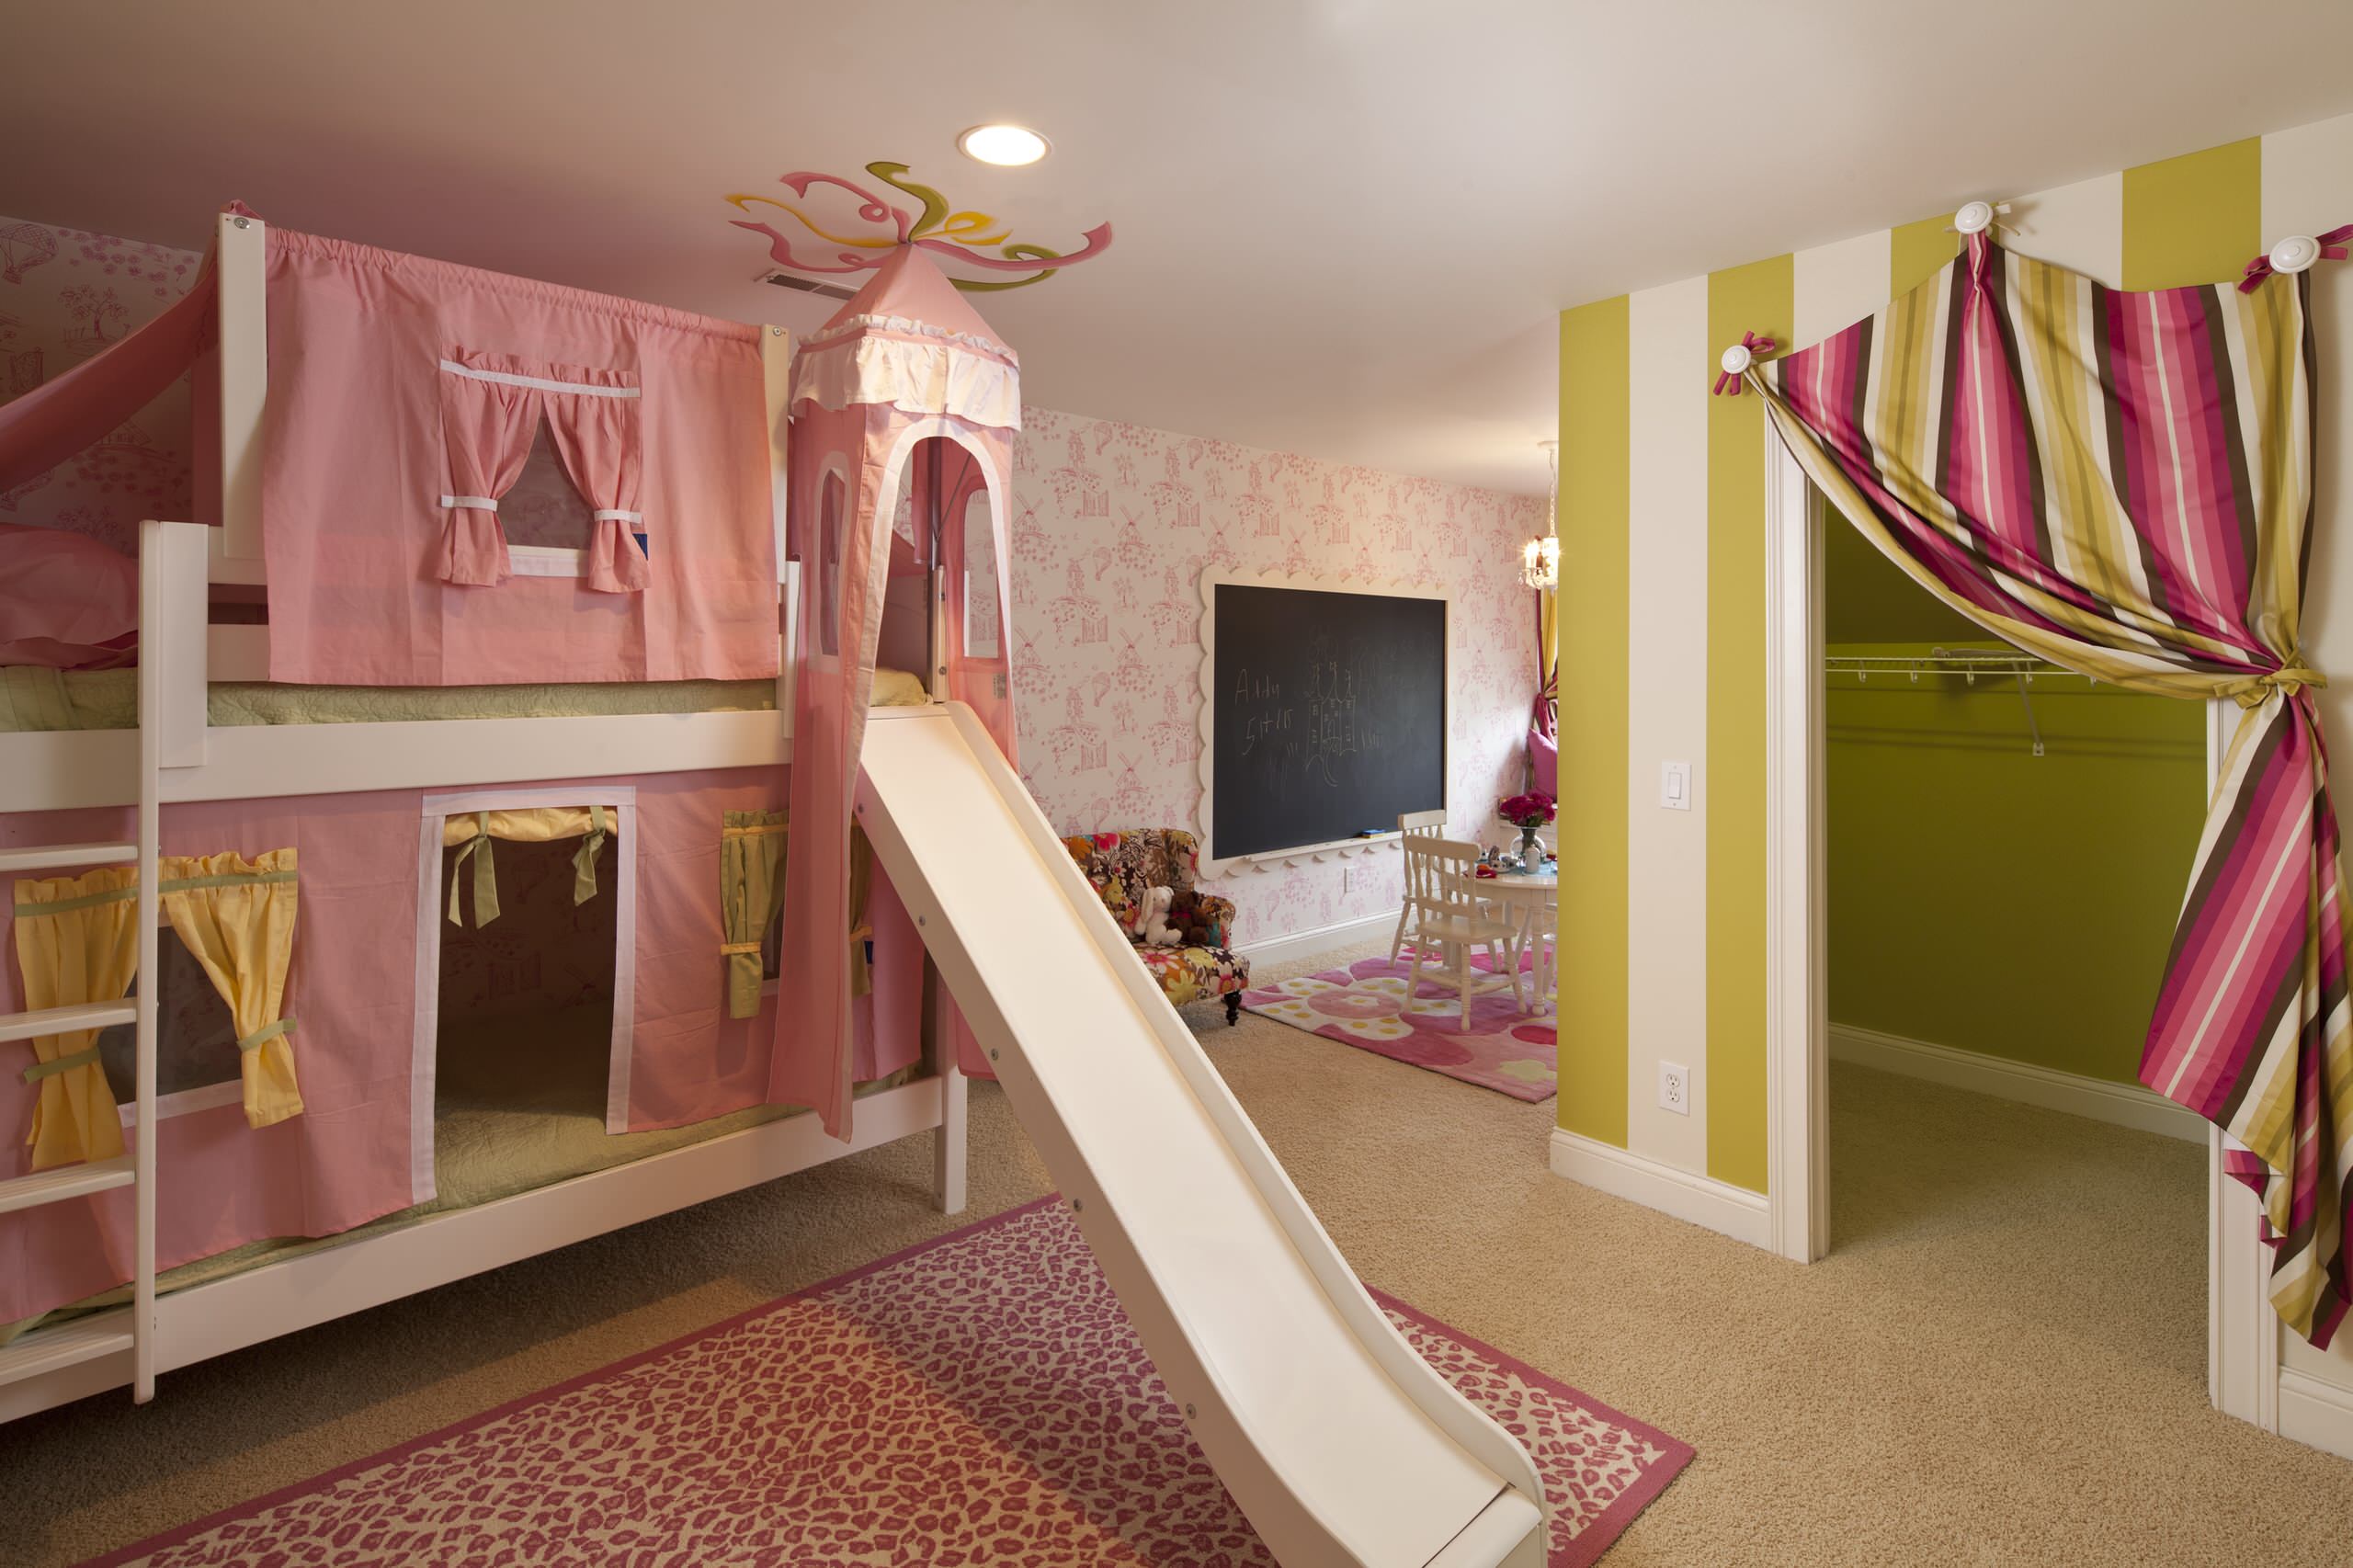 75 beautiful playroom pictures & ideas - gender: girl - august